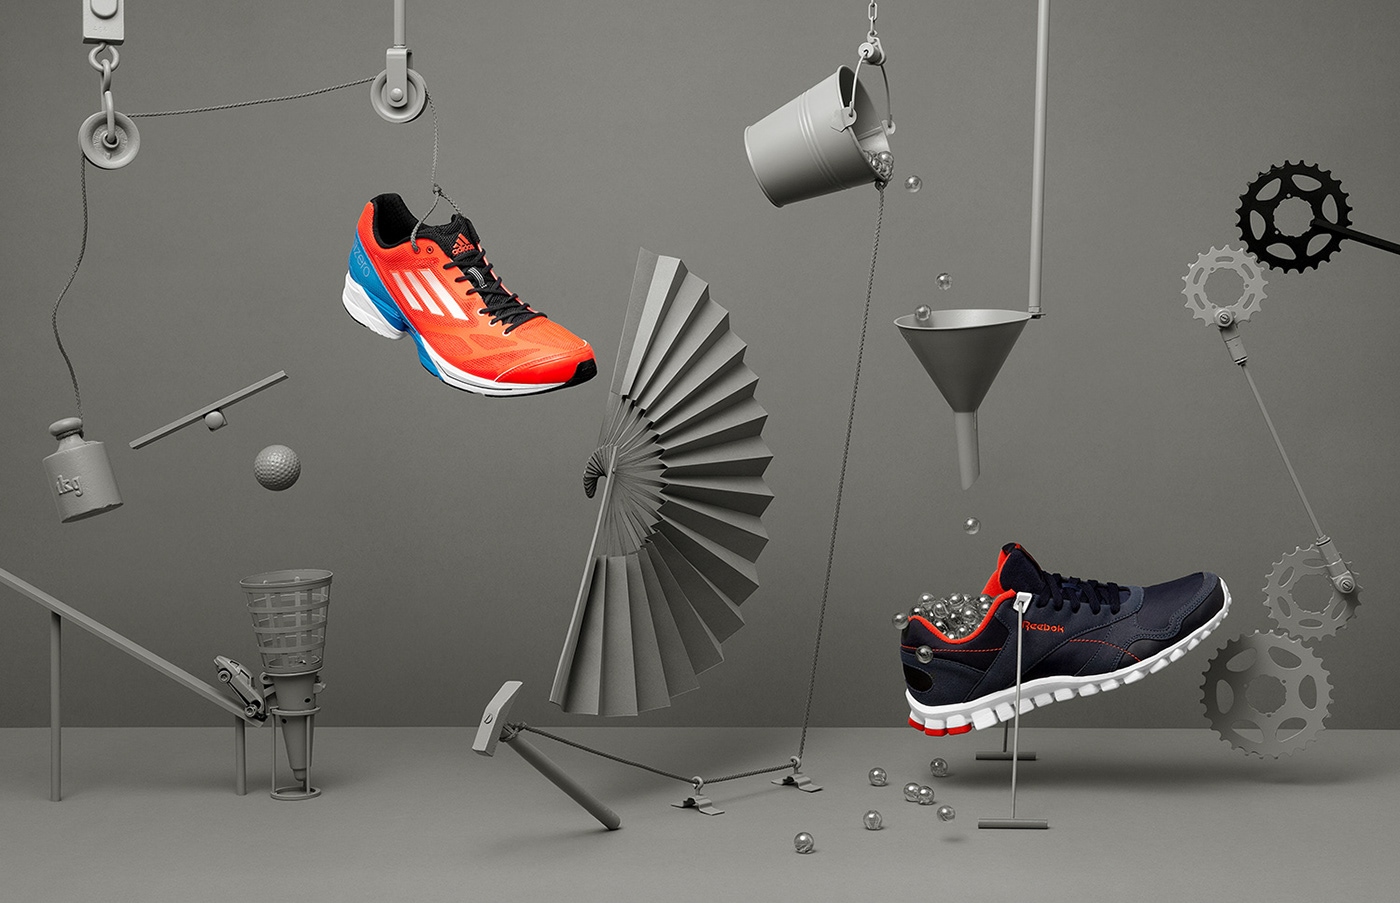 editorial tactile installation sneakers Nike converse chain-reaction setdesign still life